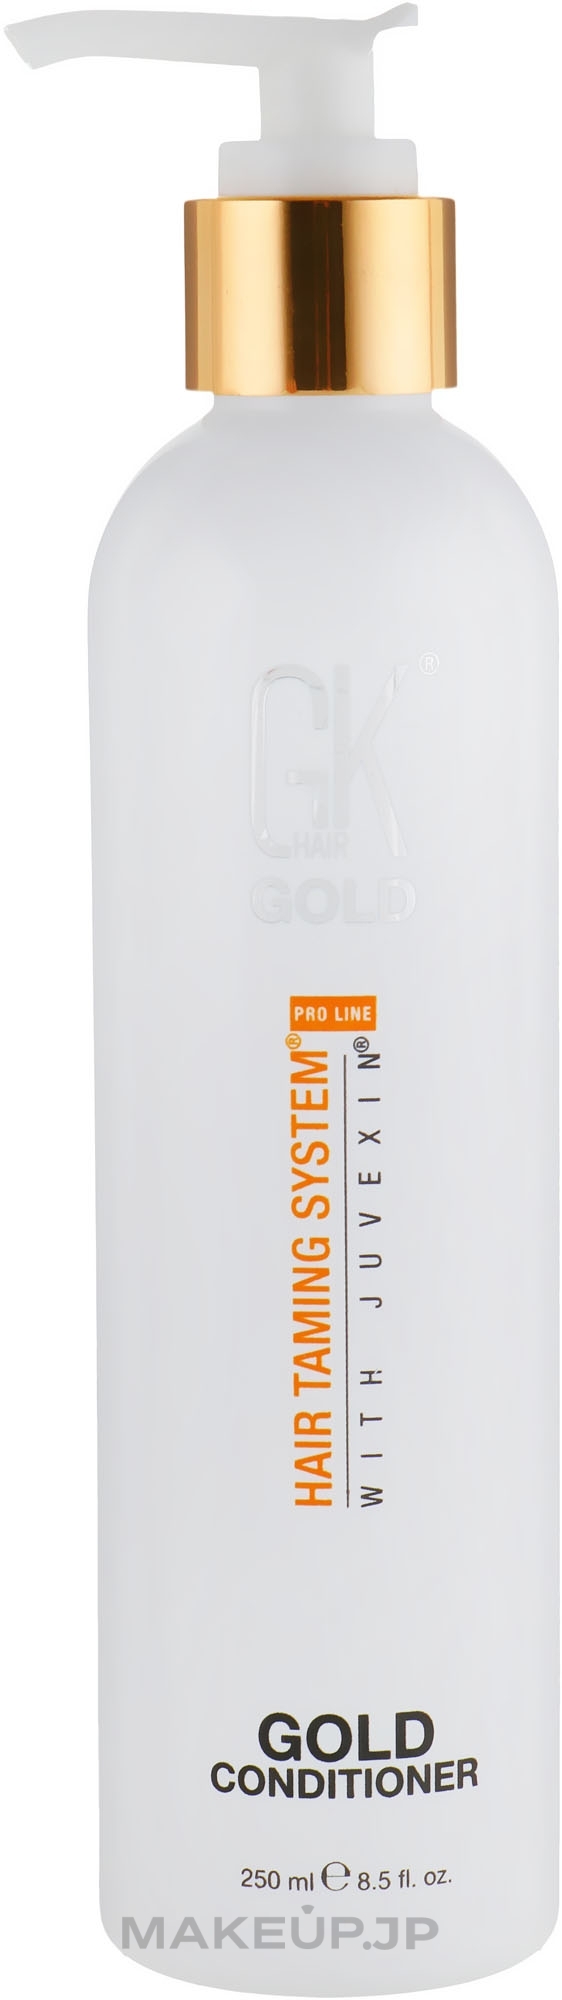 Gold Collection Conditioner - GKhair Gold Conditioner — photo 250 ml